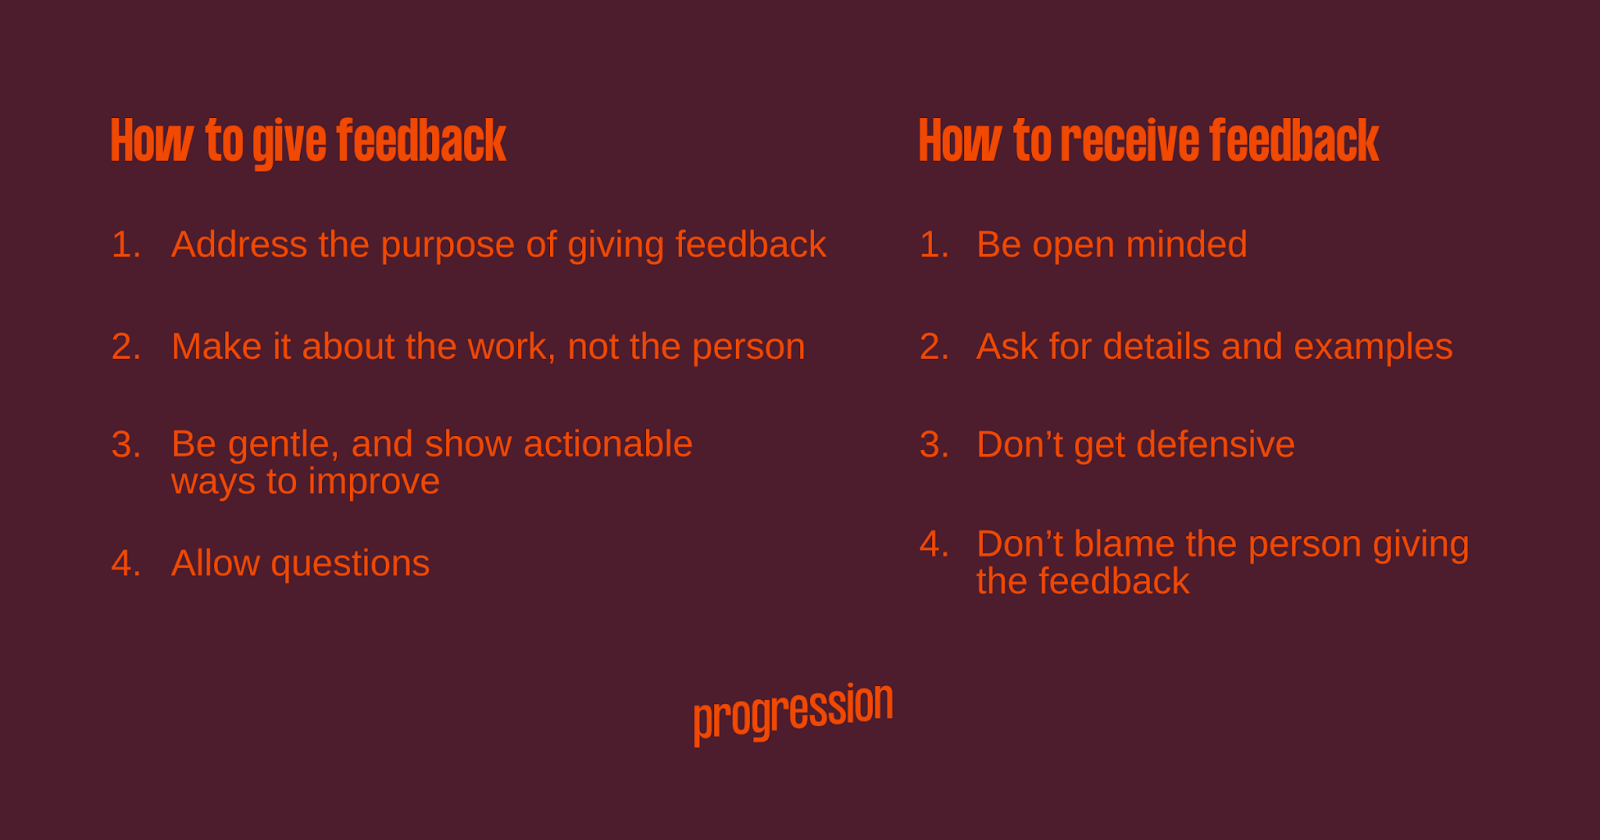 Table showing how to give and receive feedback